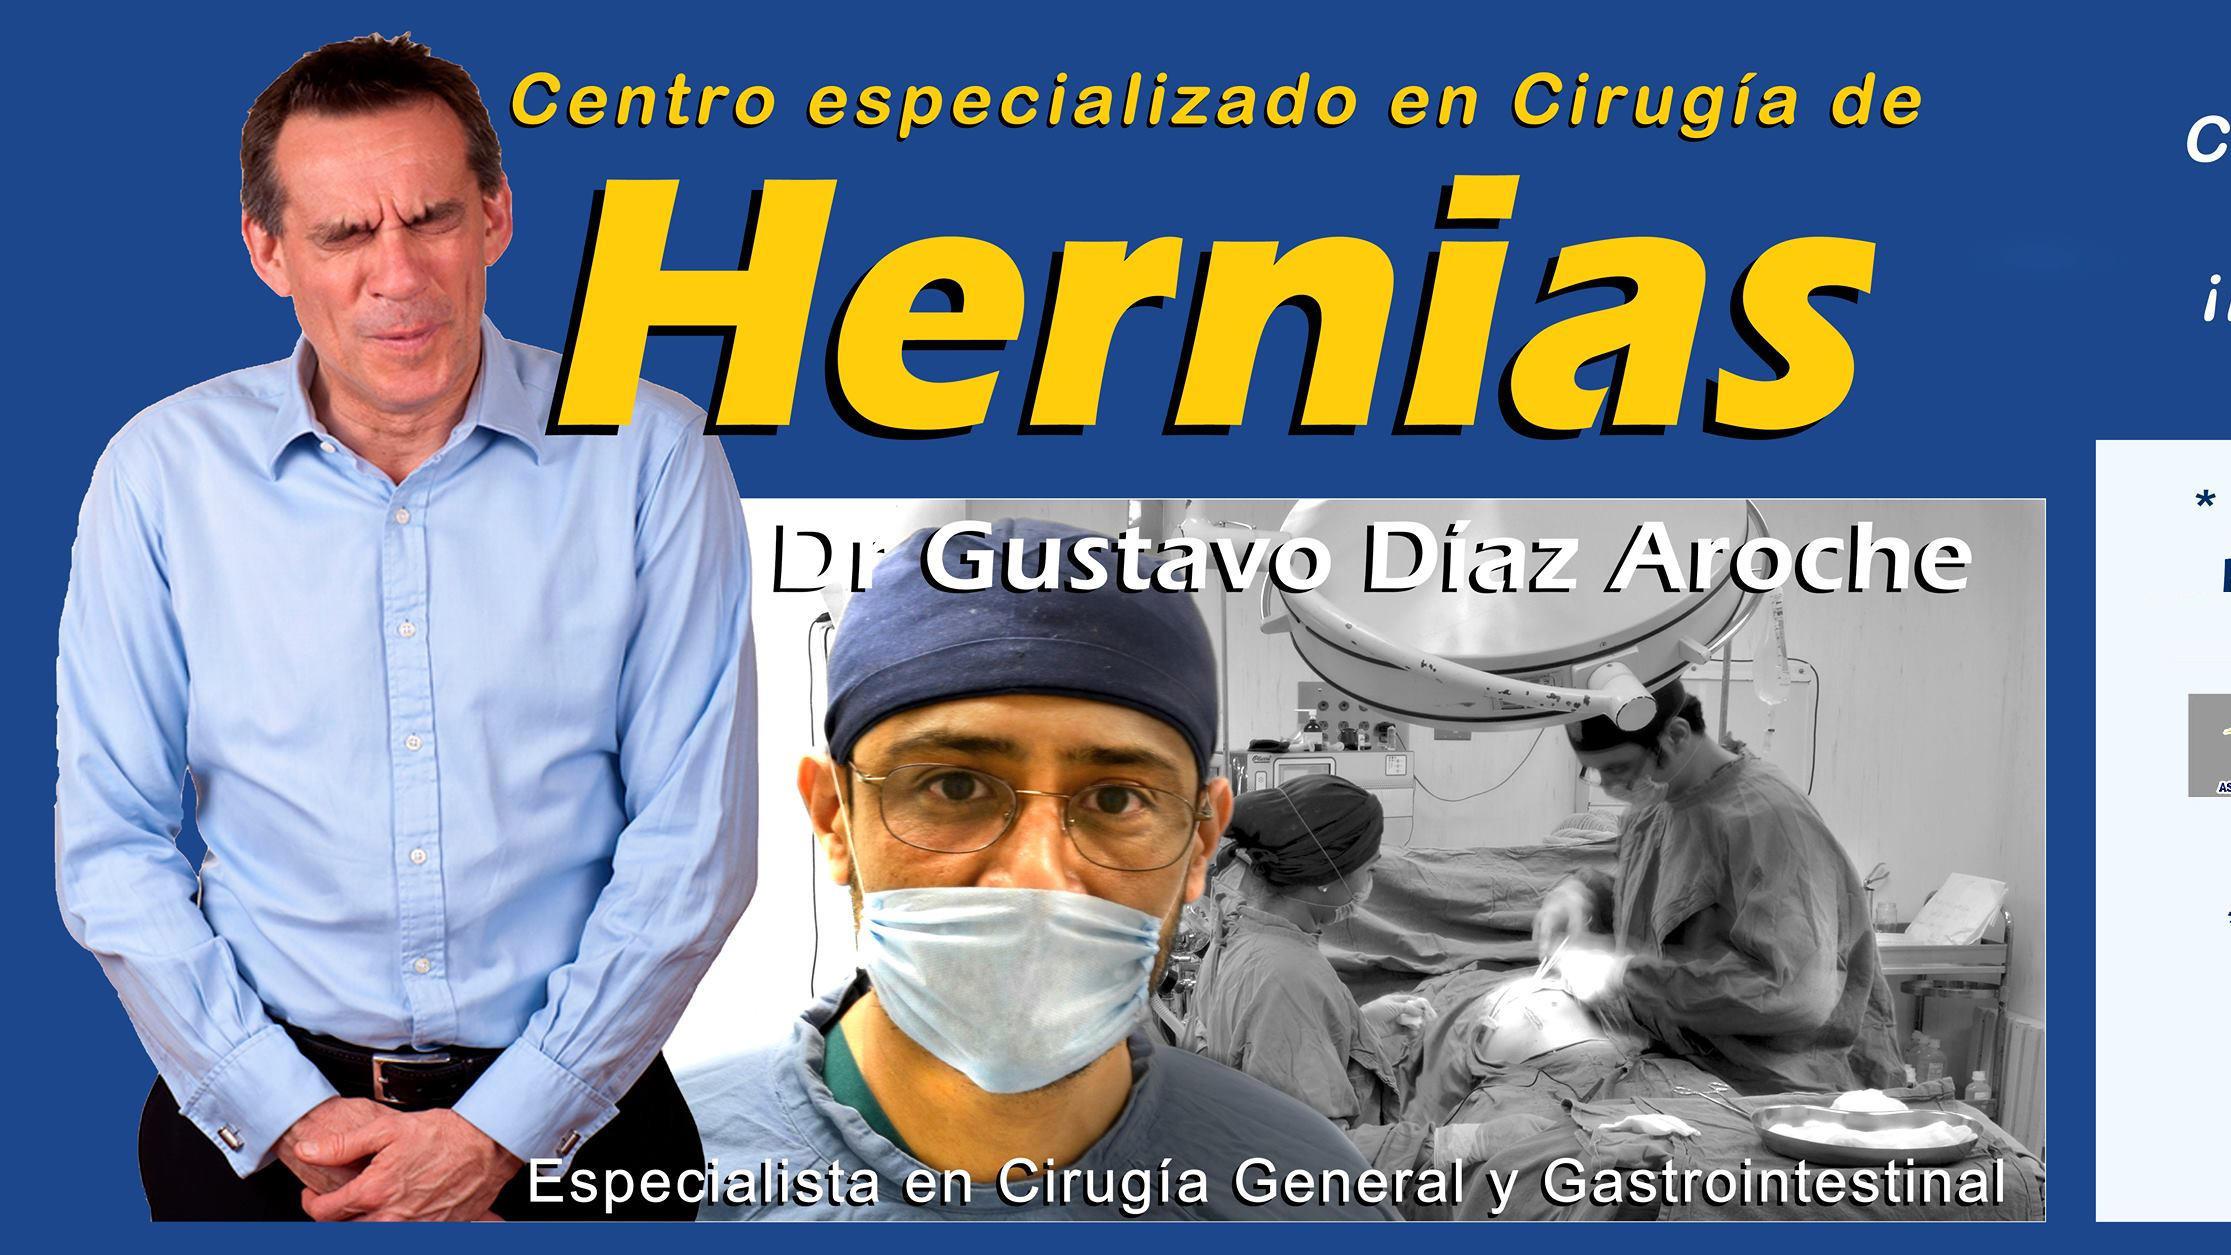 Images Dr. Gustavo Diaz Aroche